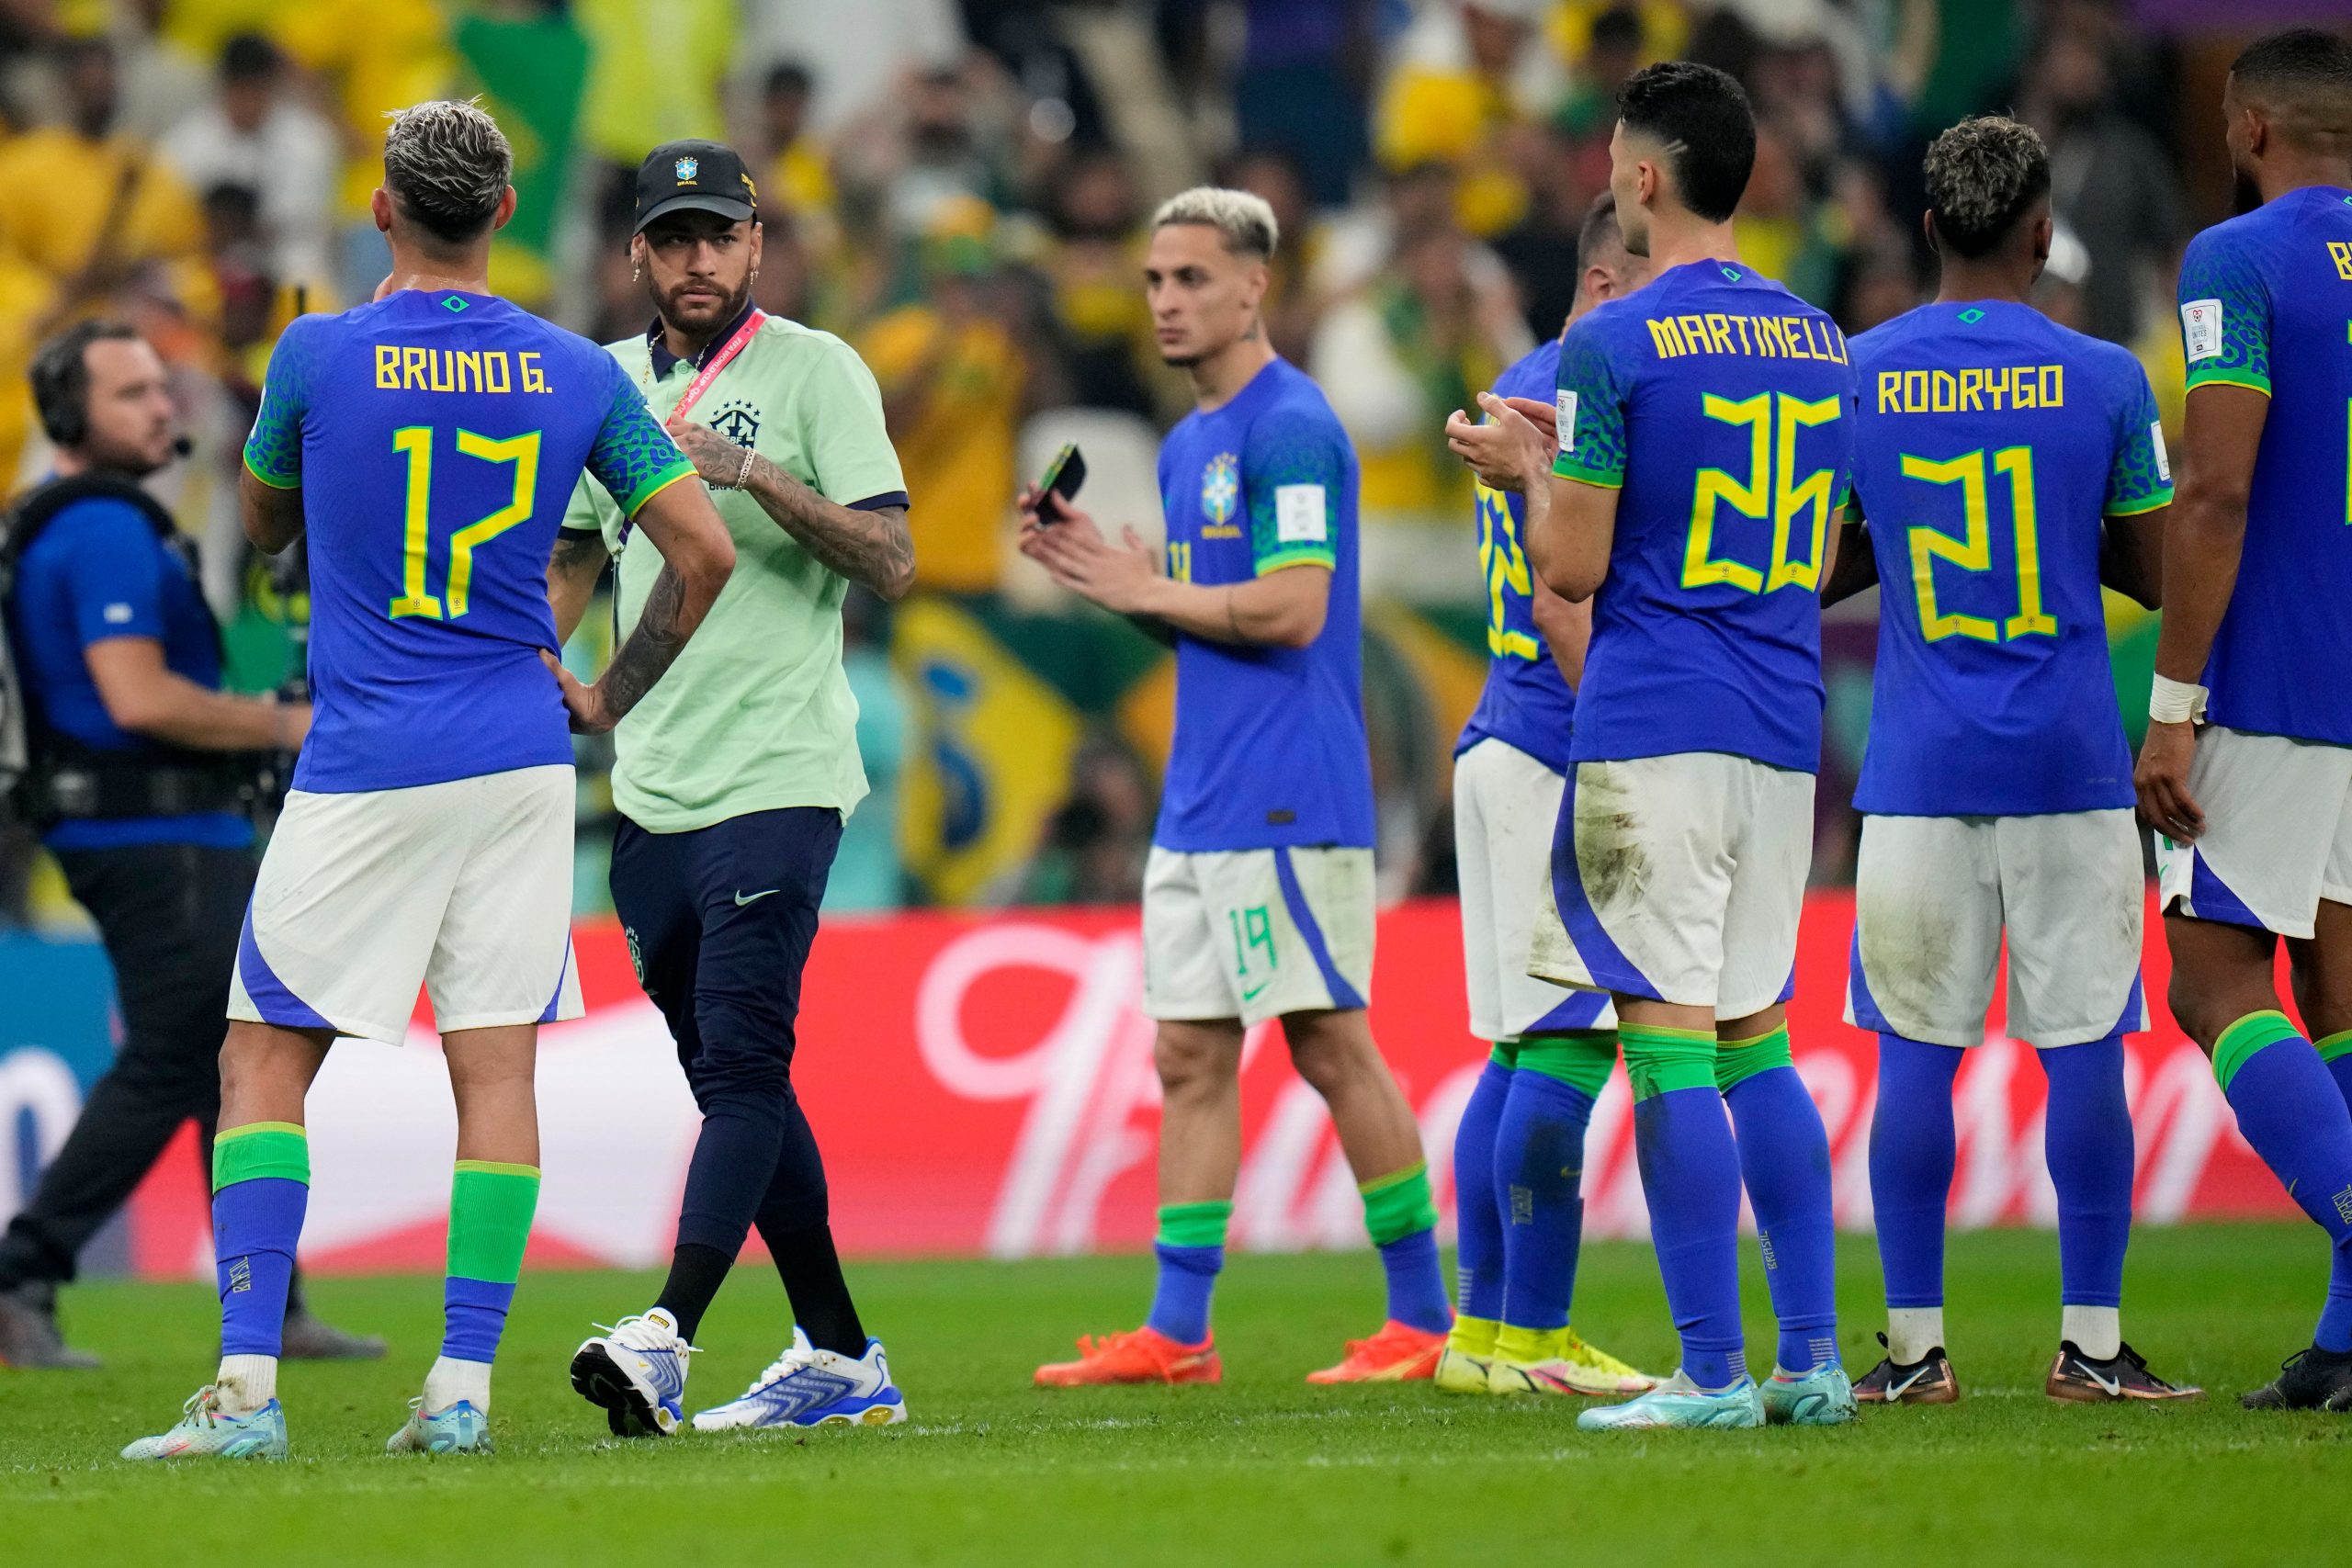 Brazil suffers first 21st century FIFA World Cup group league match loss vs Cameroon